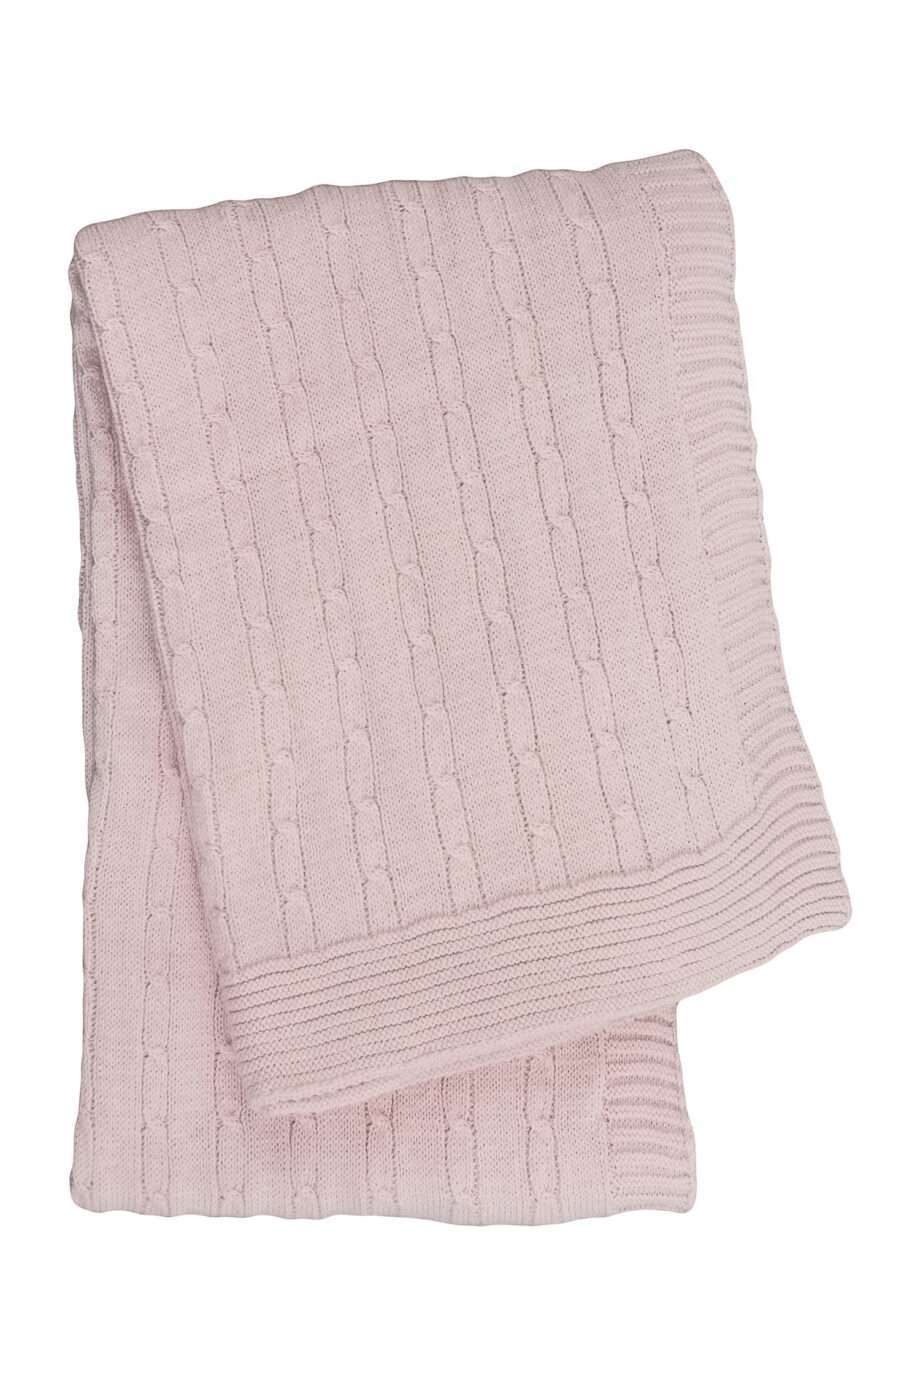 Create a cozy room for your little ones with our gentle cotton blankets! #babypinkbliss